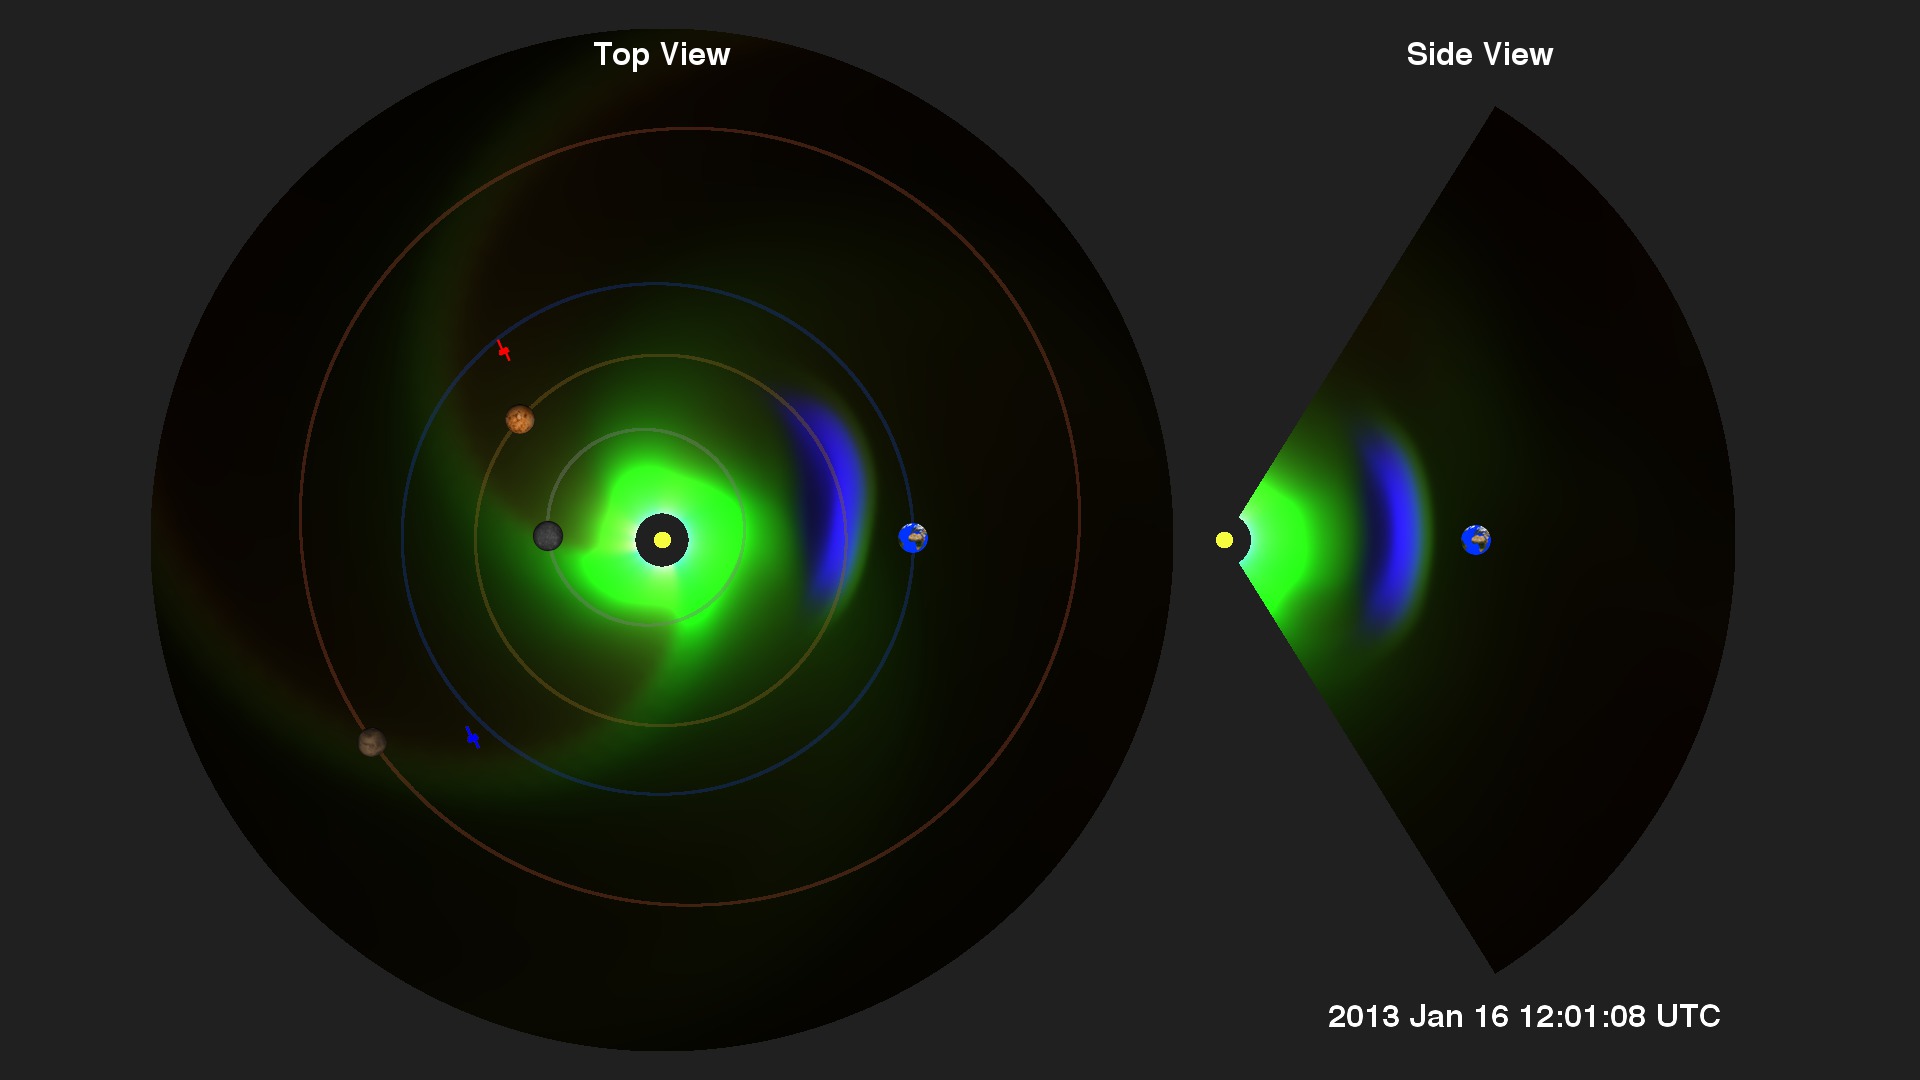 Enlil model for the Jan. 13, 2013 coronal mass ejection, plotted out to ten astronomical units (beyond the orbit of Saturn).  The top view slices the data in the plane of the Earth's orbit and projects the planetary orbits onto that.  The side view is a cross-section through the Sun-Earth line.  The wedge-shape of the side view is because the Enlil model only extends above and below the solar equator by 60 degrees.